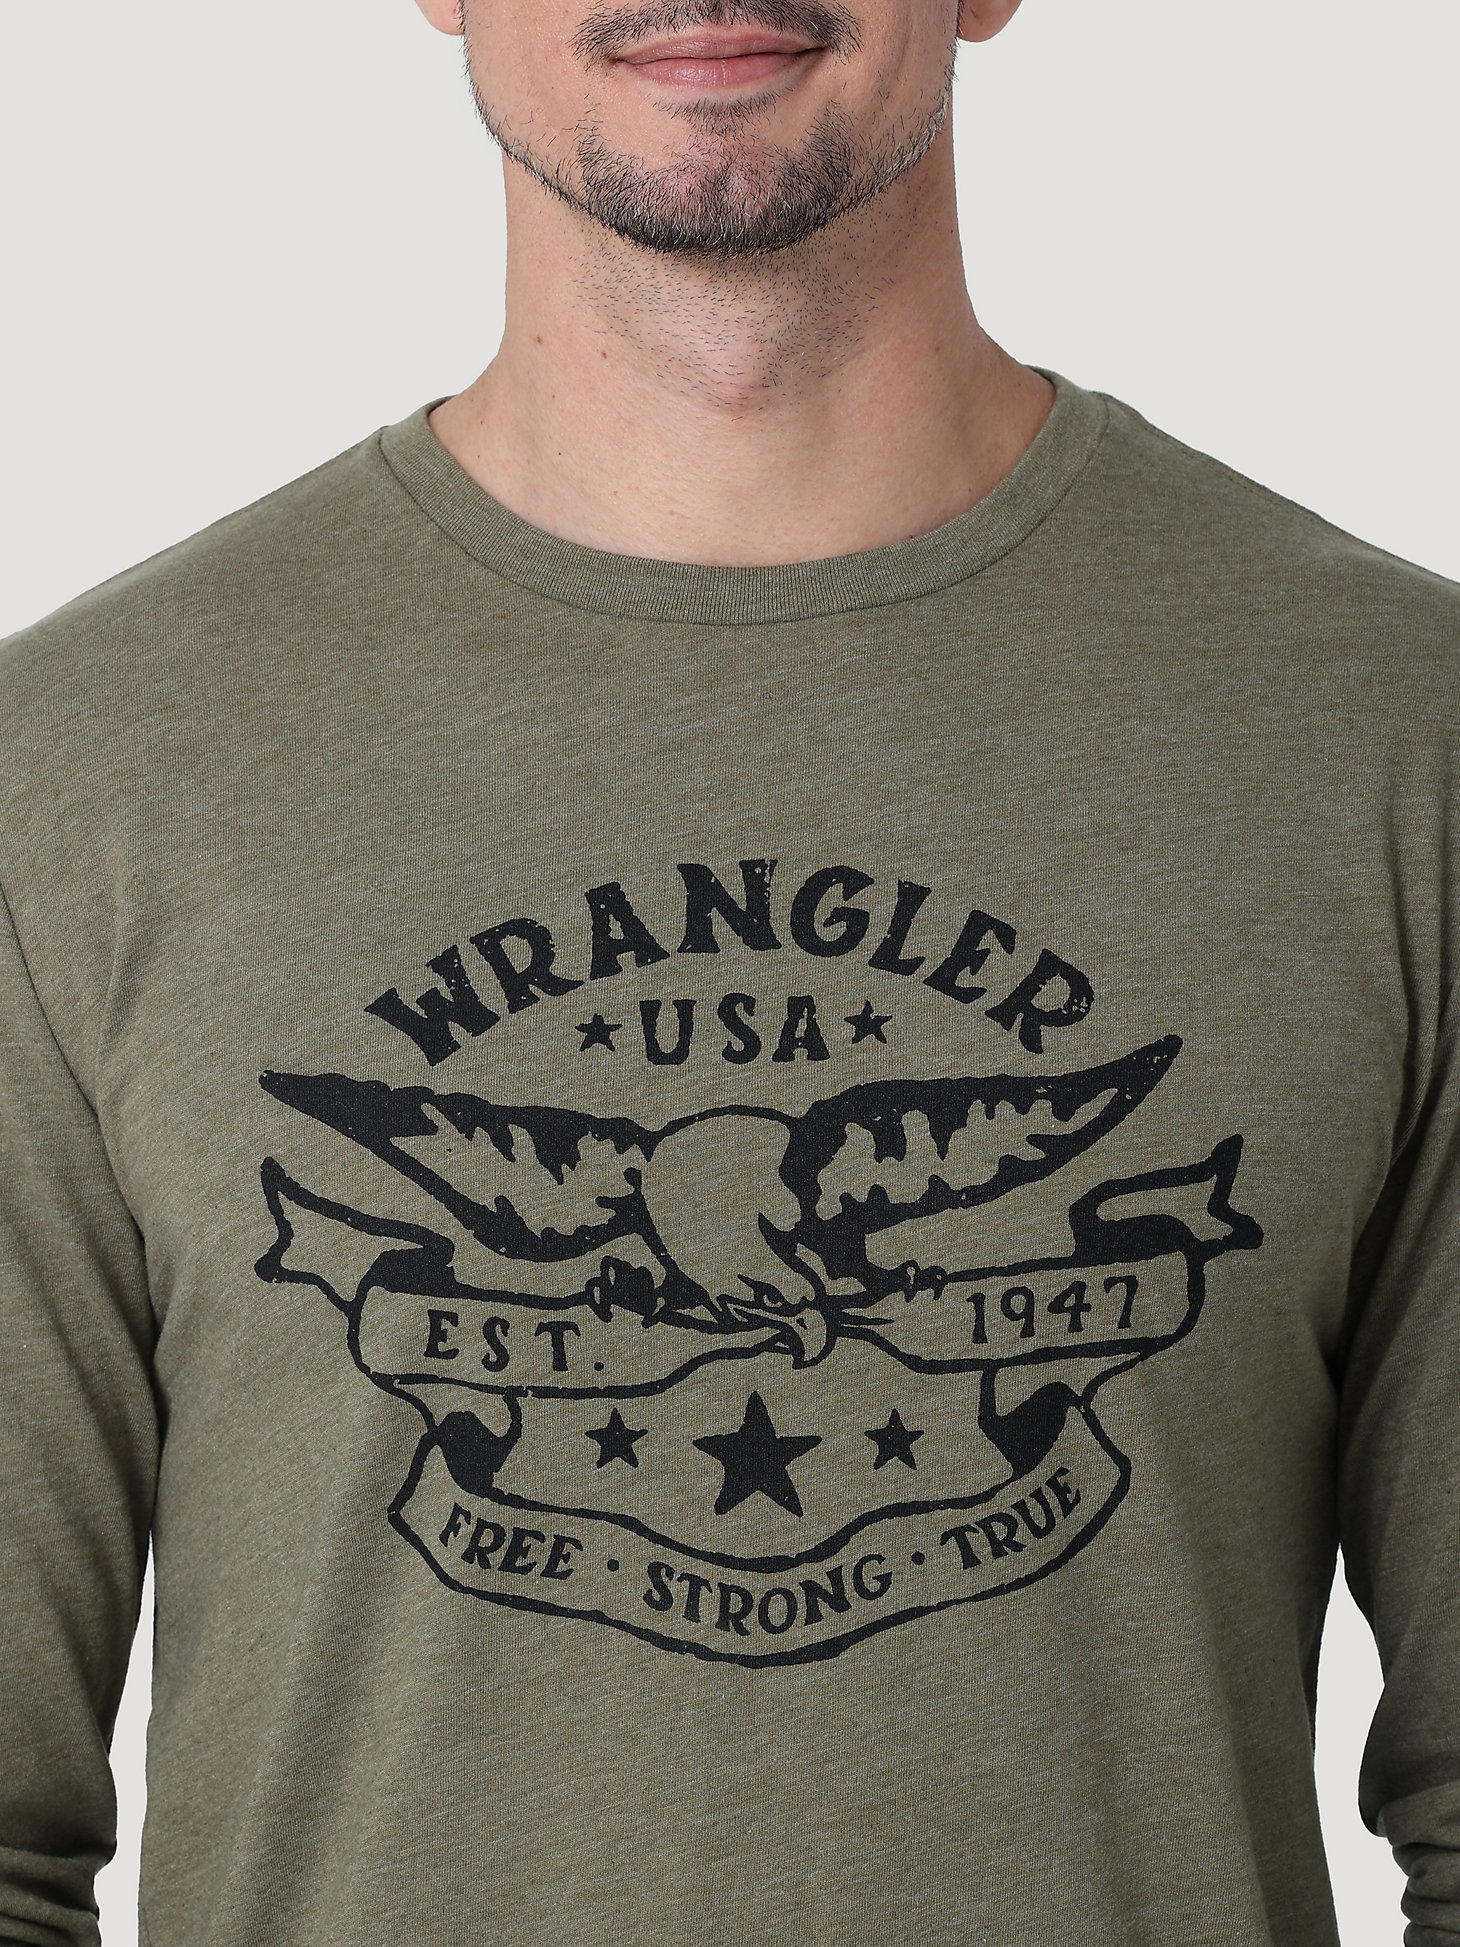 Men's Eagle Graphic T-Shirt in Burnt Olive alternative view 1